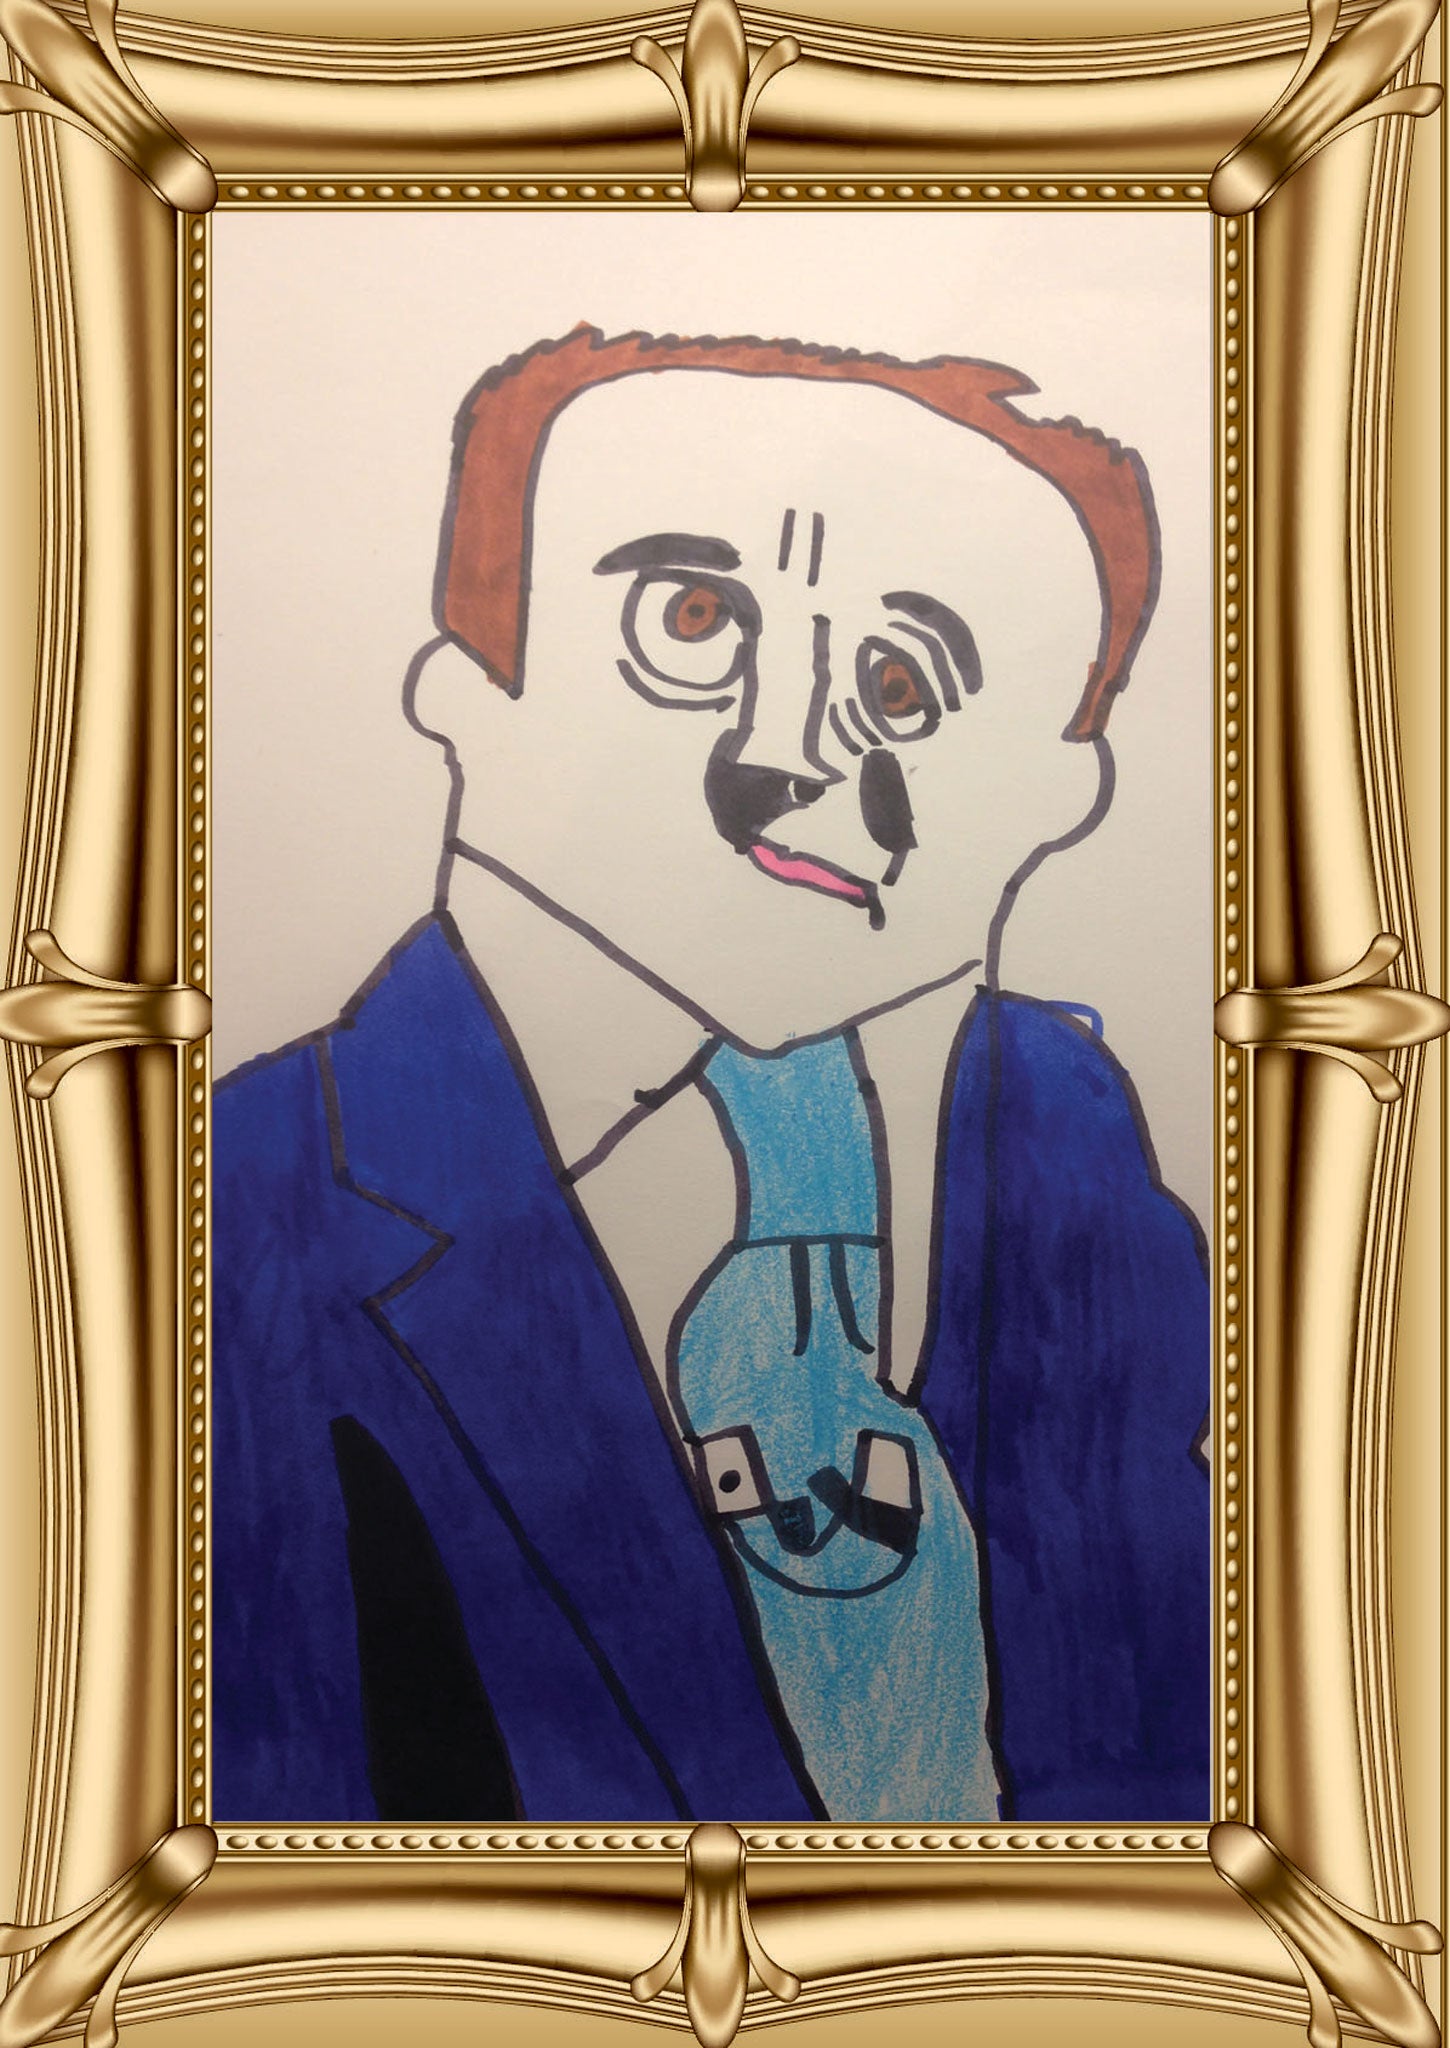 David Cameron has been depicted by a number of enthusiastic young artists